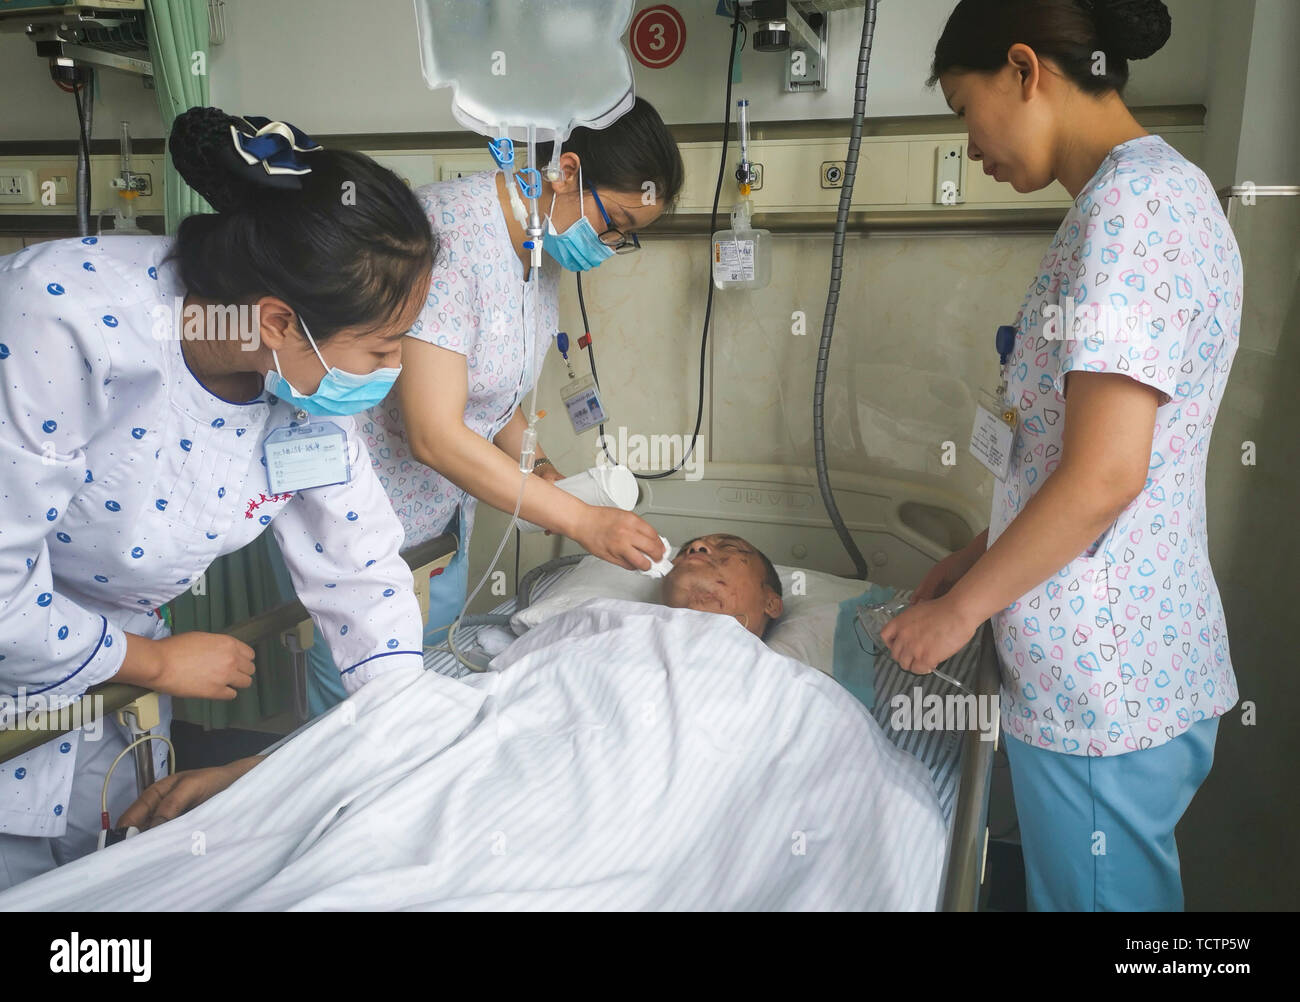 Changchun, China. 10th June, 2019. The paramedics treat the wounded at the First Hospital of Jilin University-the Eastern Division in Changchun, northeast China, June 10, 2019. Nine people have been confirmed dead and 10 others injured following a rock burst late Sunday at a coal mine in Longjiapu, northeast China. The burst occured at around 8:00 p.m. at Longjiapu coal mining company and caused an earthquake measuring 2.3 on the Richter scale, according to local authorities. Credit: Xu Ziheng/Xinhua/Alamy Live News Stock Photo